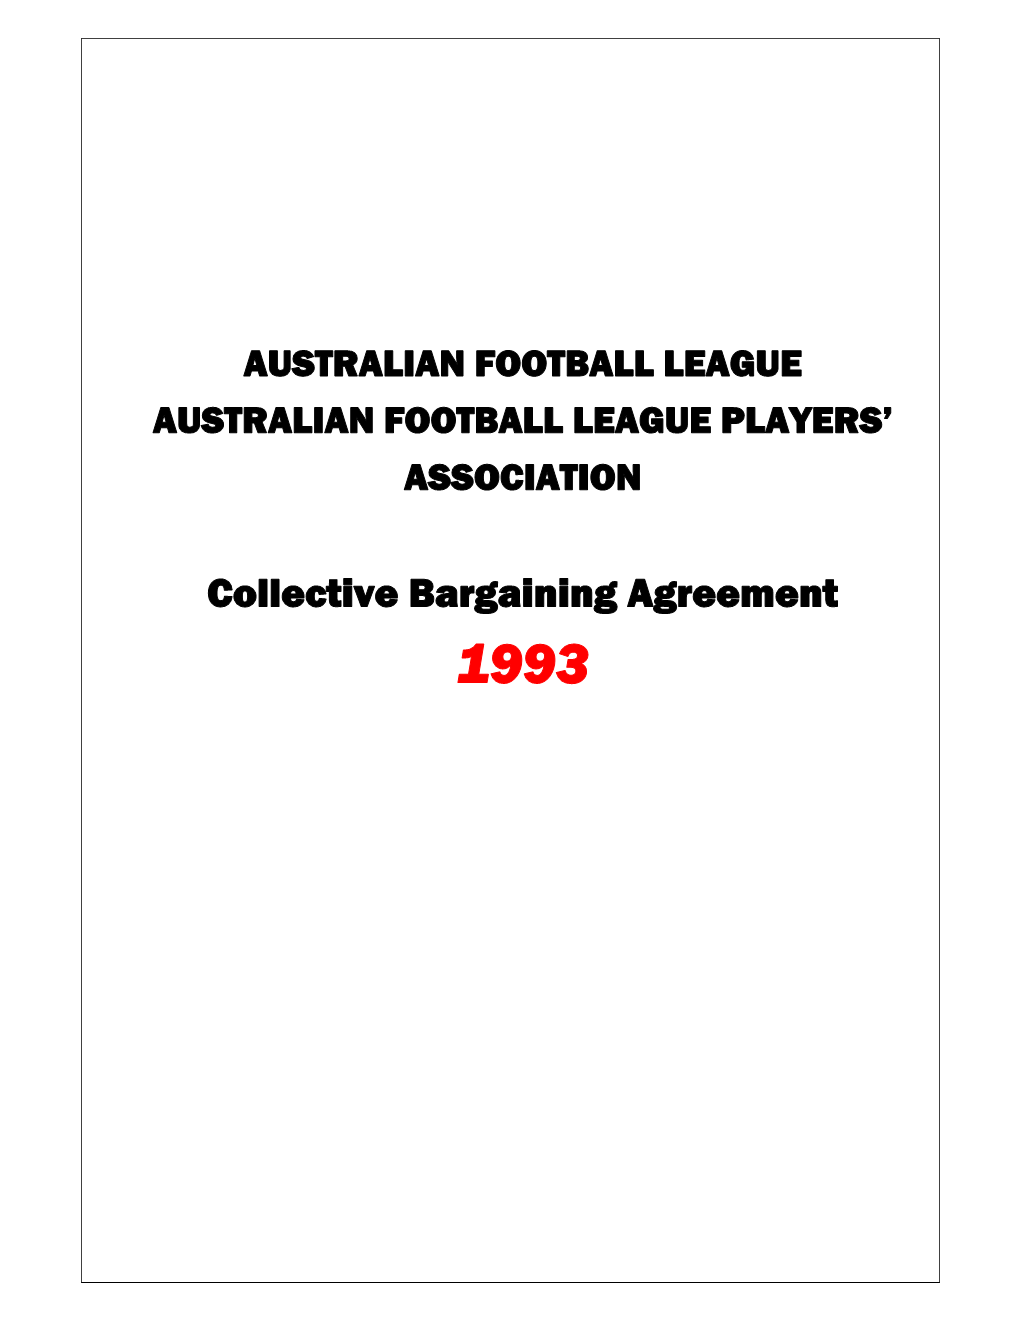 Collective Bargaining Agreement 1993 THIS Agreement Is Made on the 21St Day of December 1993